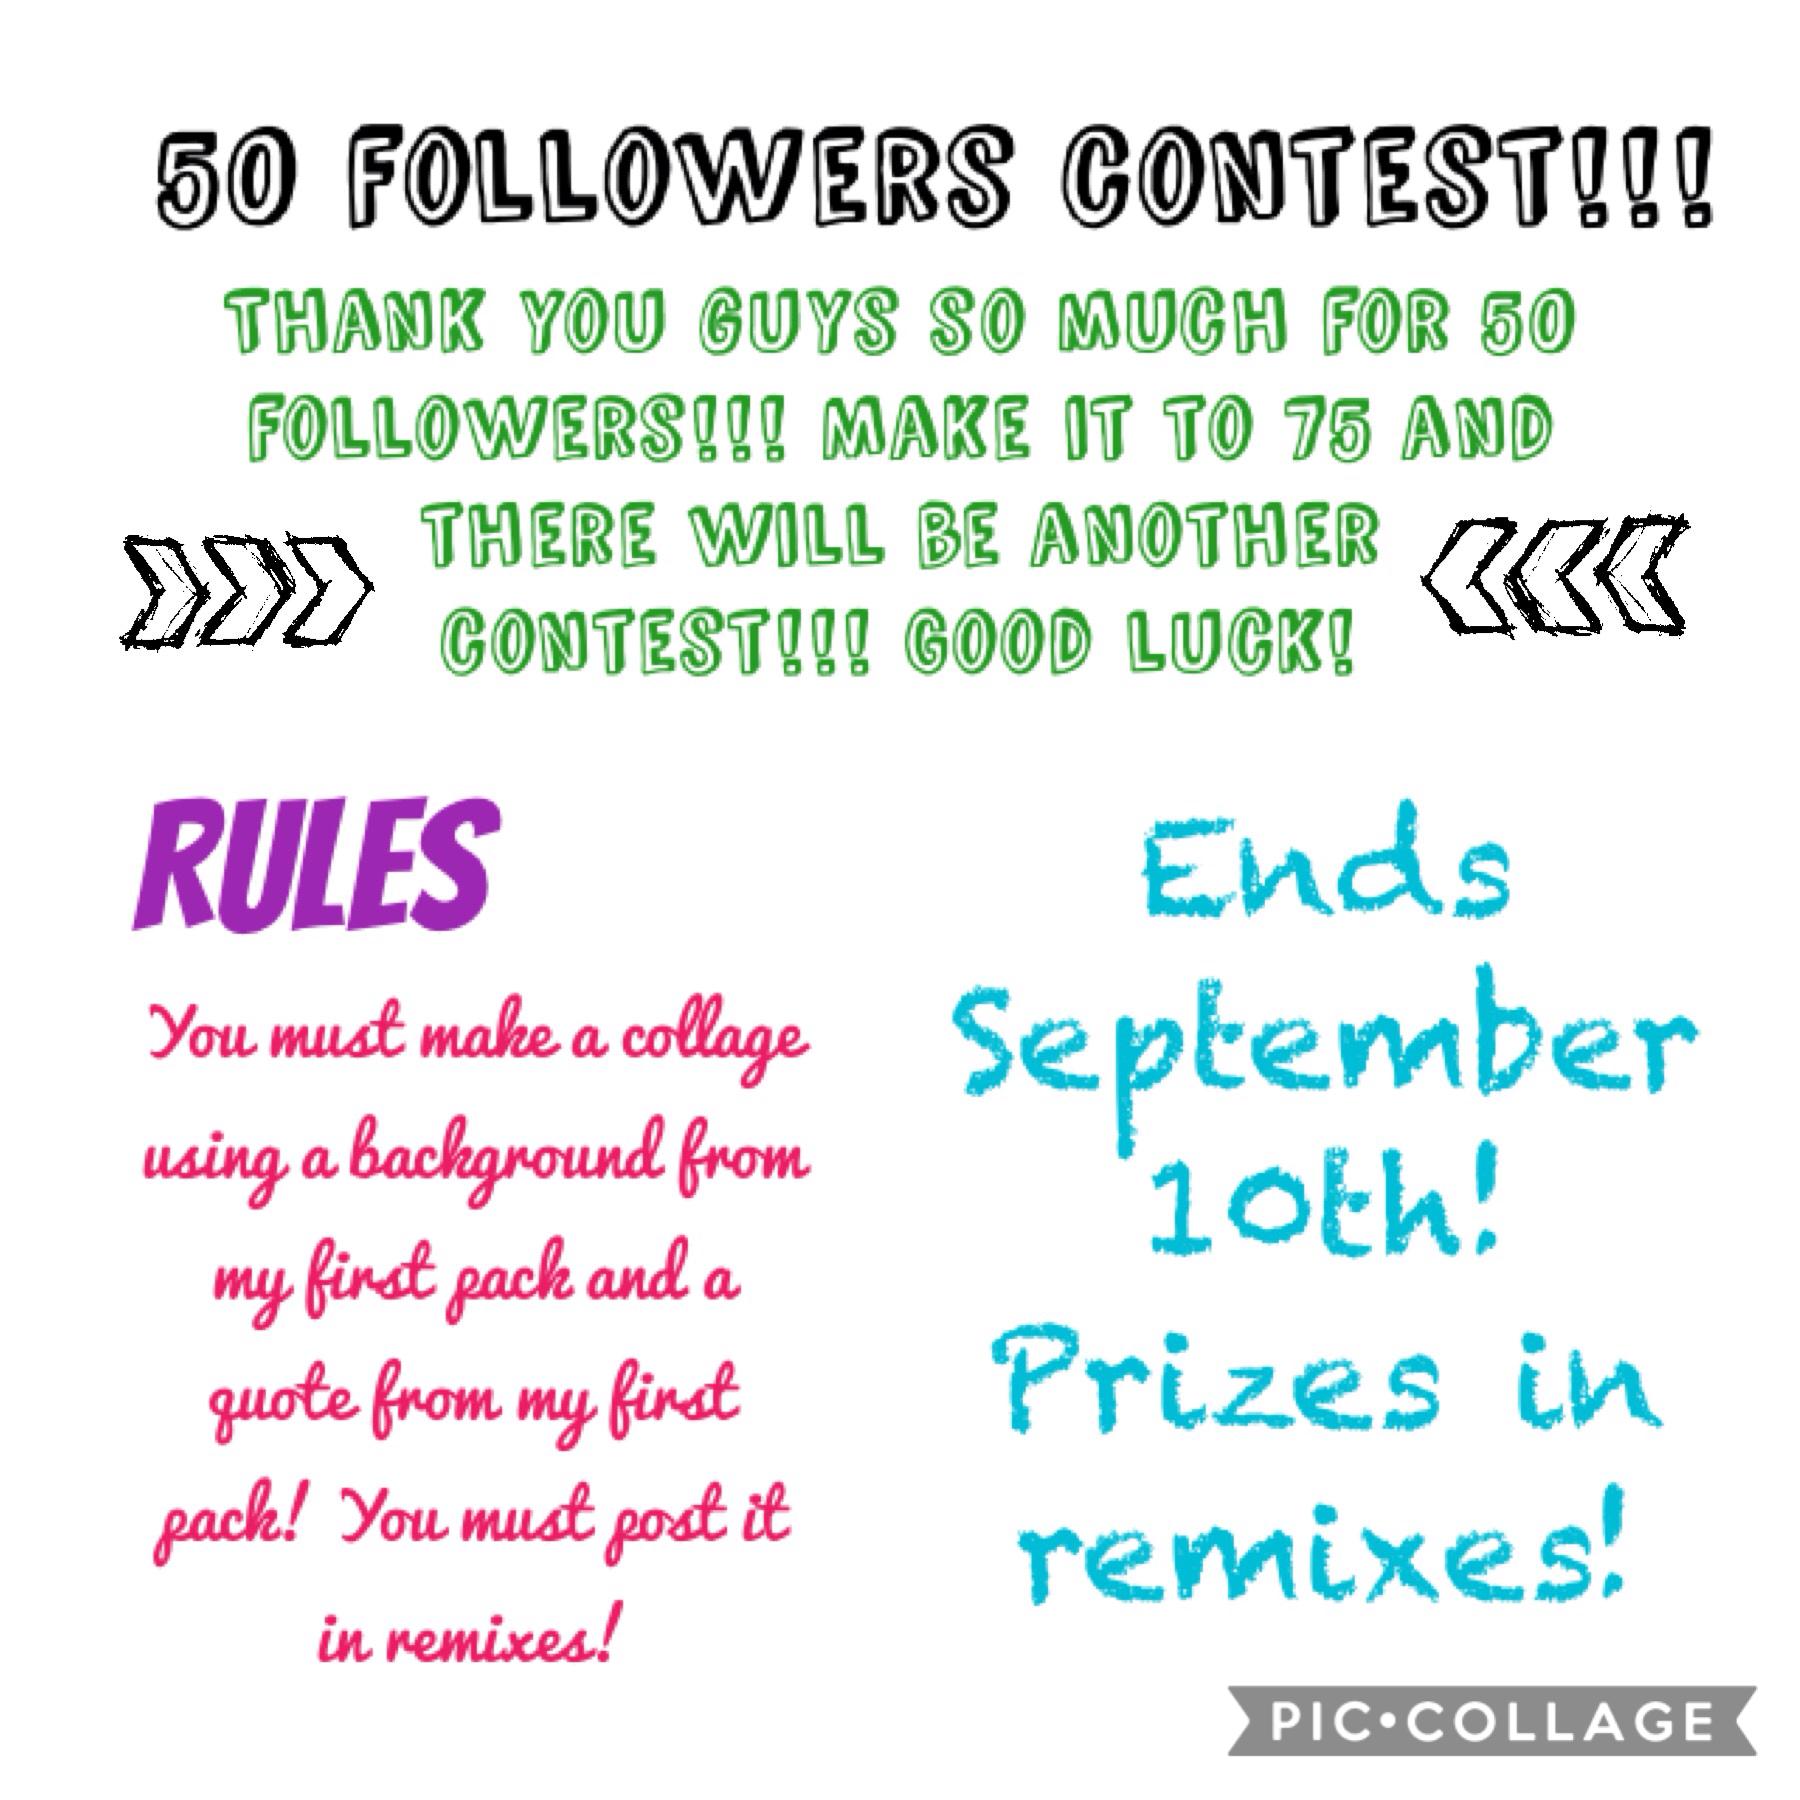 You can only post on one account! Good luck. Prizes in remixes 